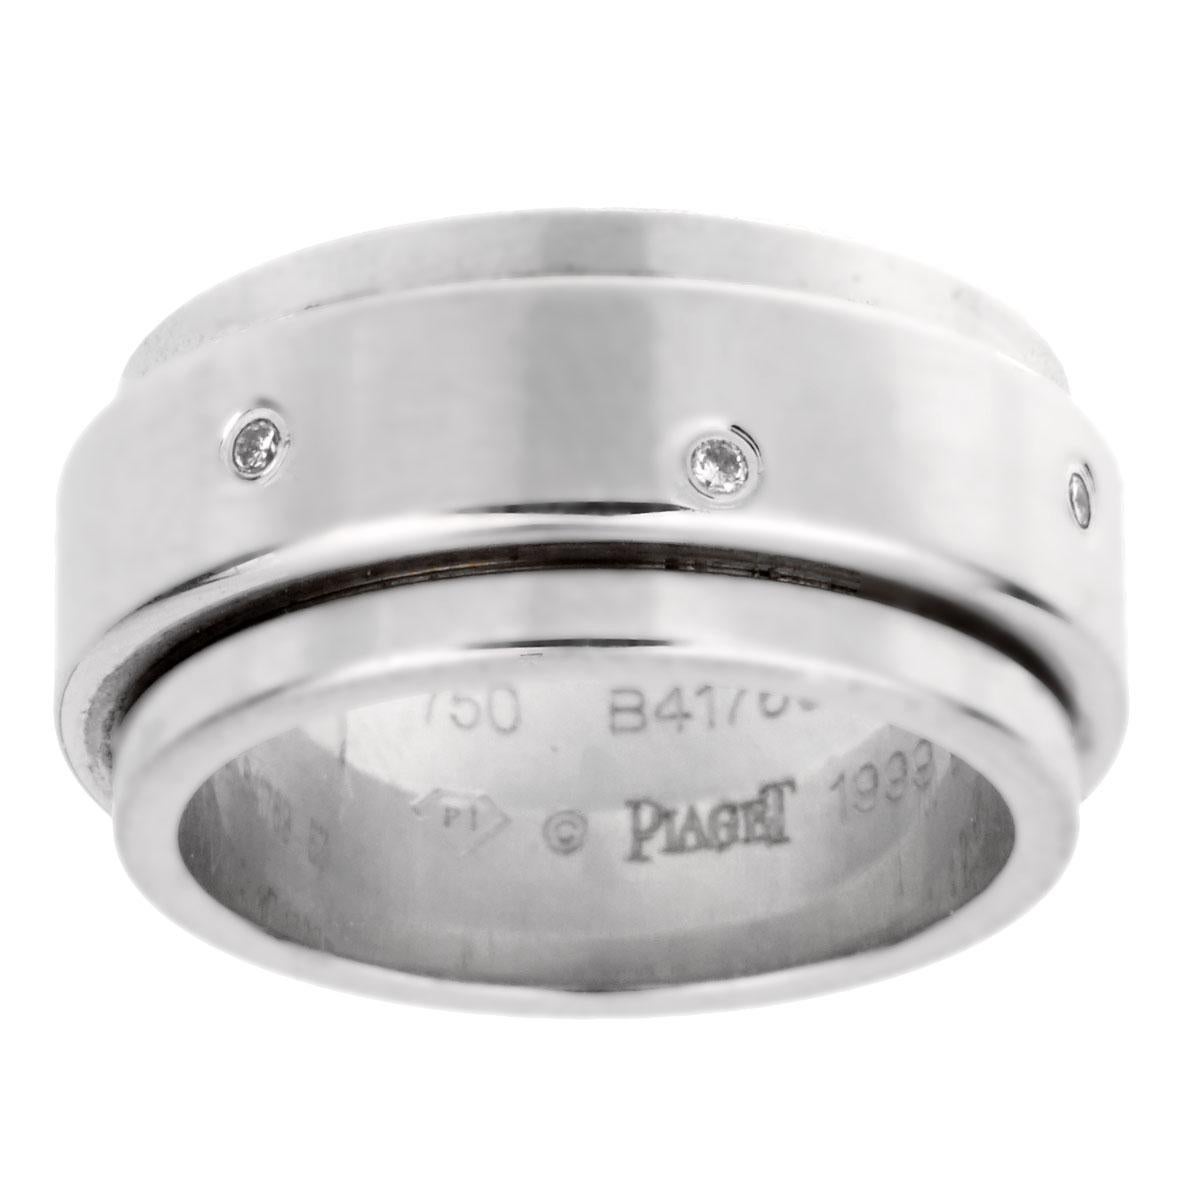 An iconic Piaget Possession ring, the center band freely spins and is set with 7 round brilliant cut diamonds in 18k white gold. The ring measures a size 8

Sku: 1908